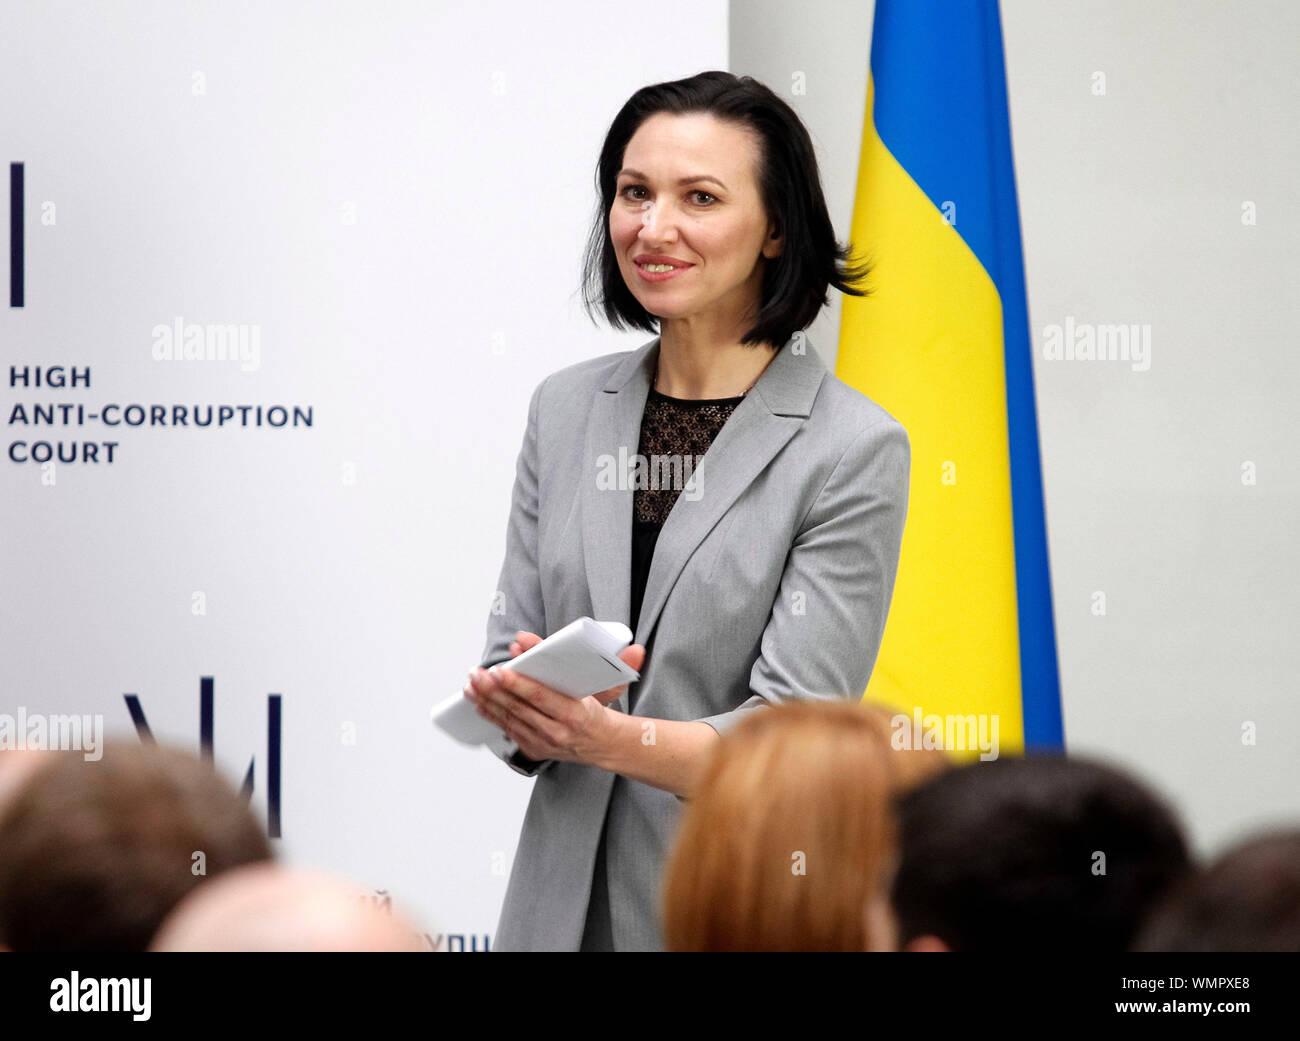 Judge Olena Tanasevych smiles during the launch of the High Anti-Corruption court in Kiev, Ukraine. Stock Photo